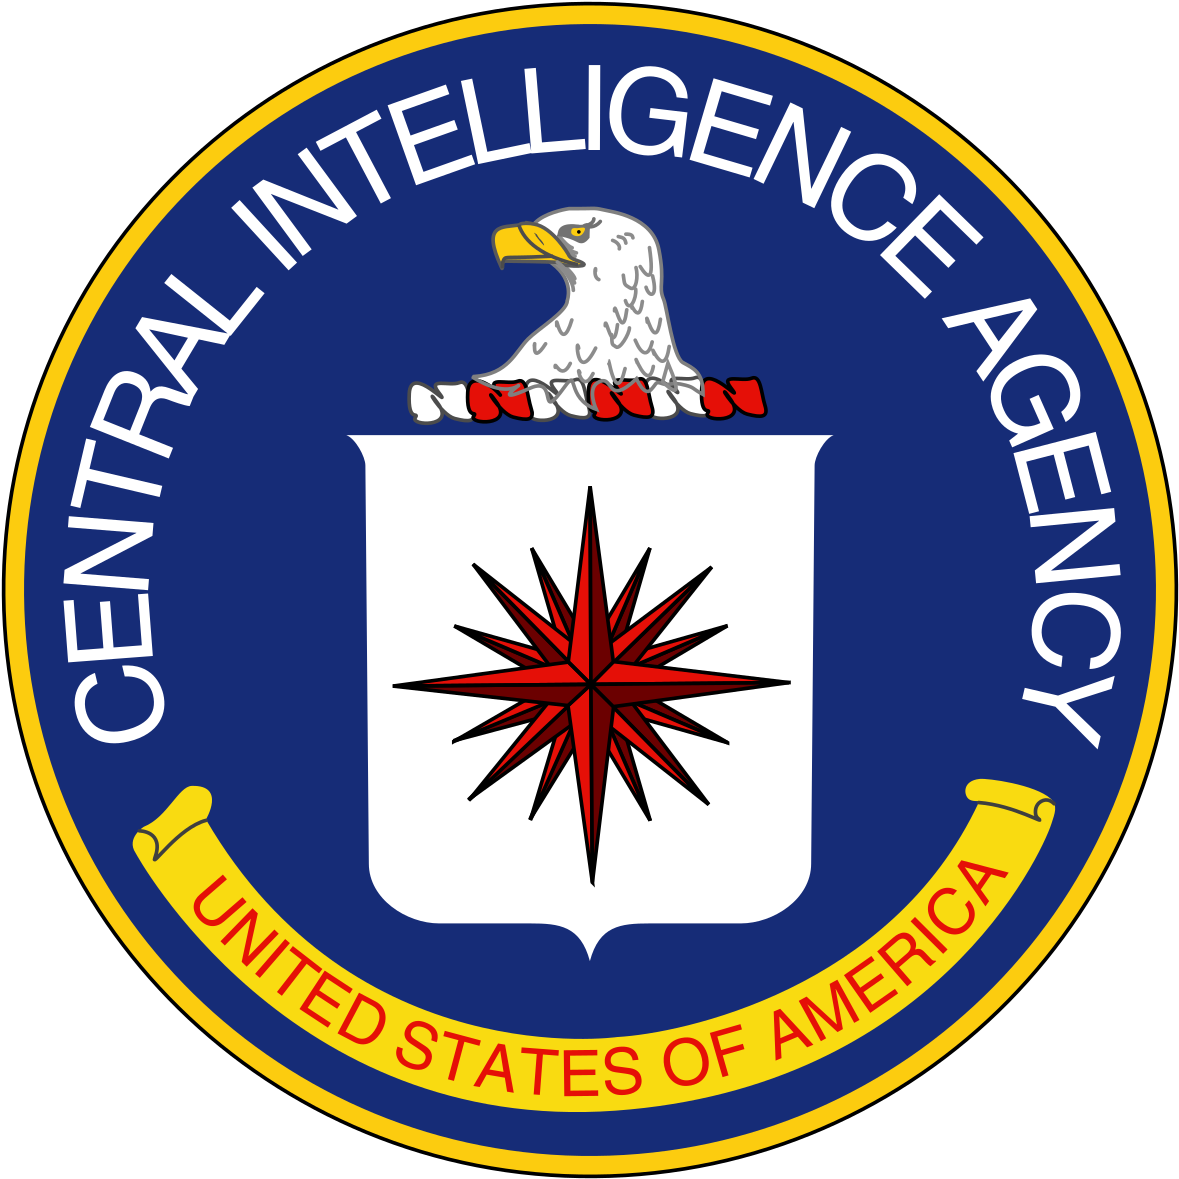 Some Of The Users Of Simas Data Are, - Central Intelligence Agency (cia) (1200x1200)